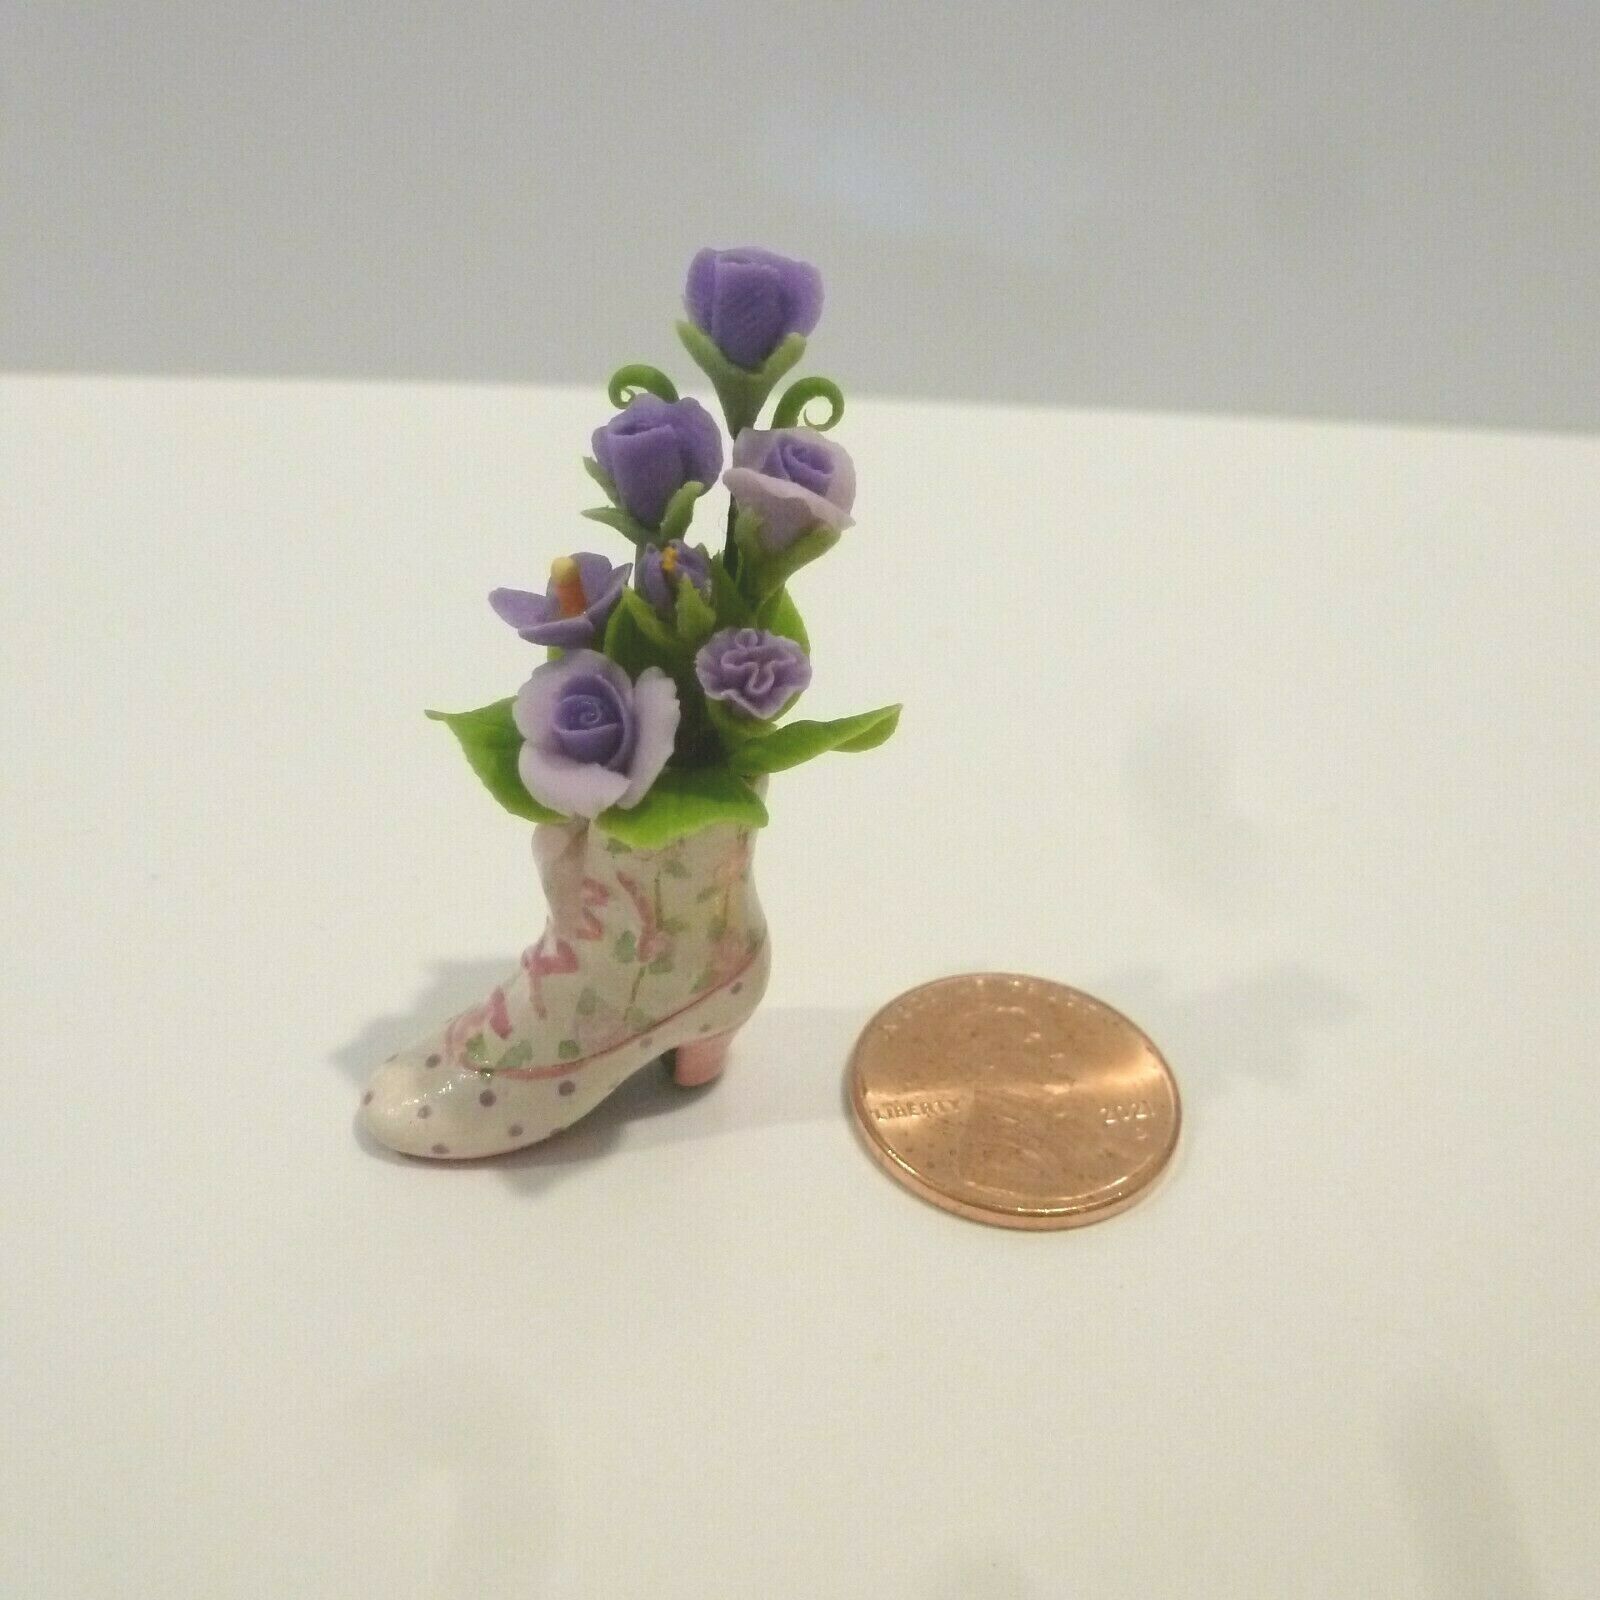 Dollhouse Miniature Castladies Short Boot Filled With Purple Flowers